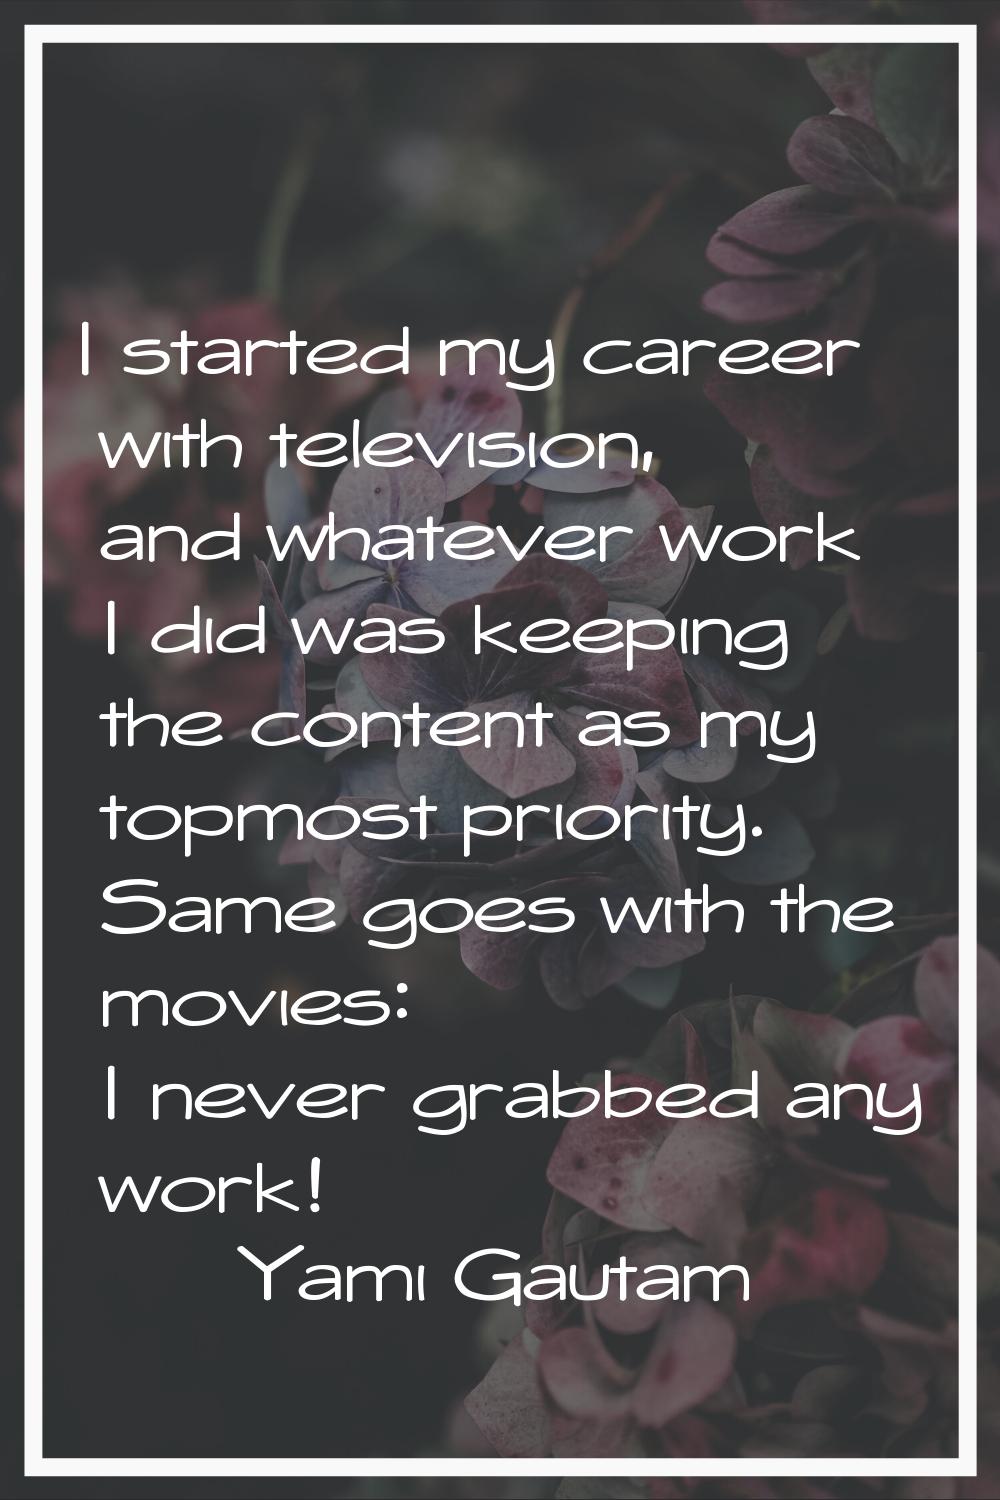 I started my career with television, and whatever work I did was keeping the content as my topmost 